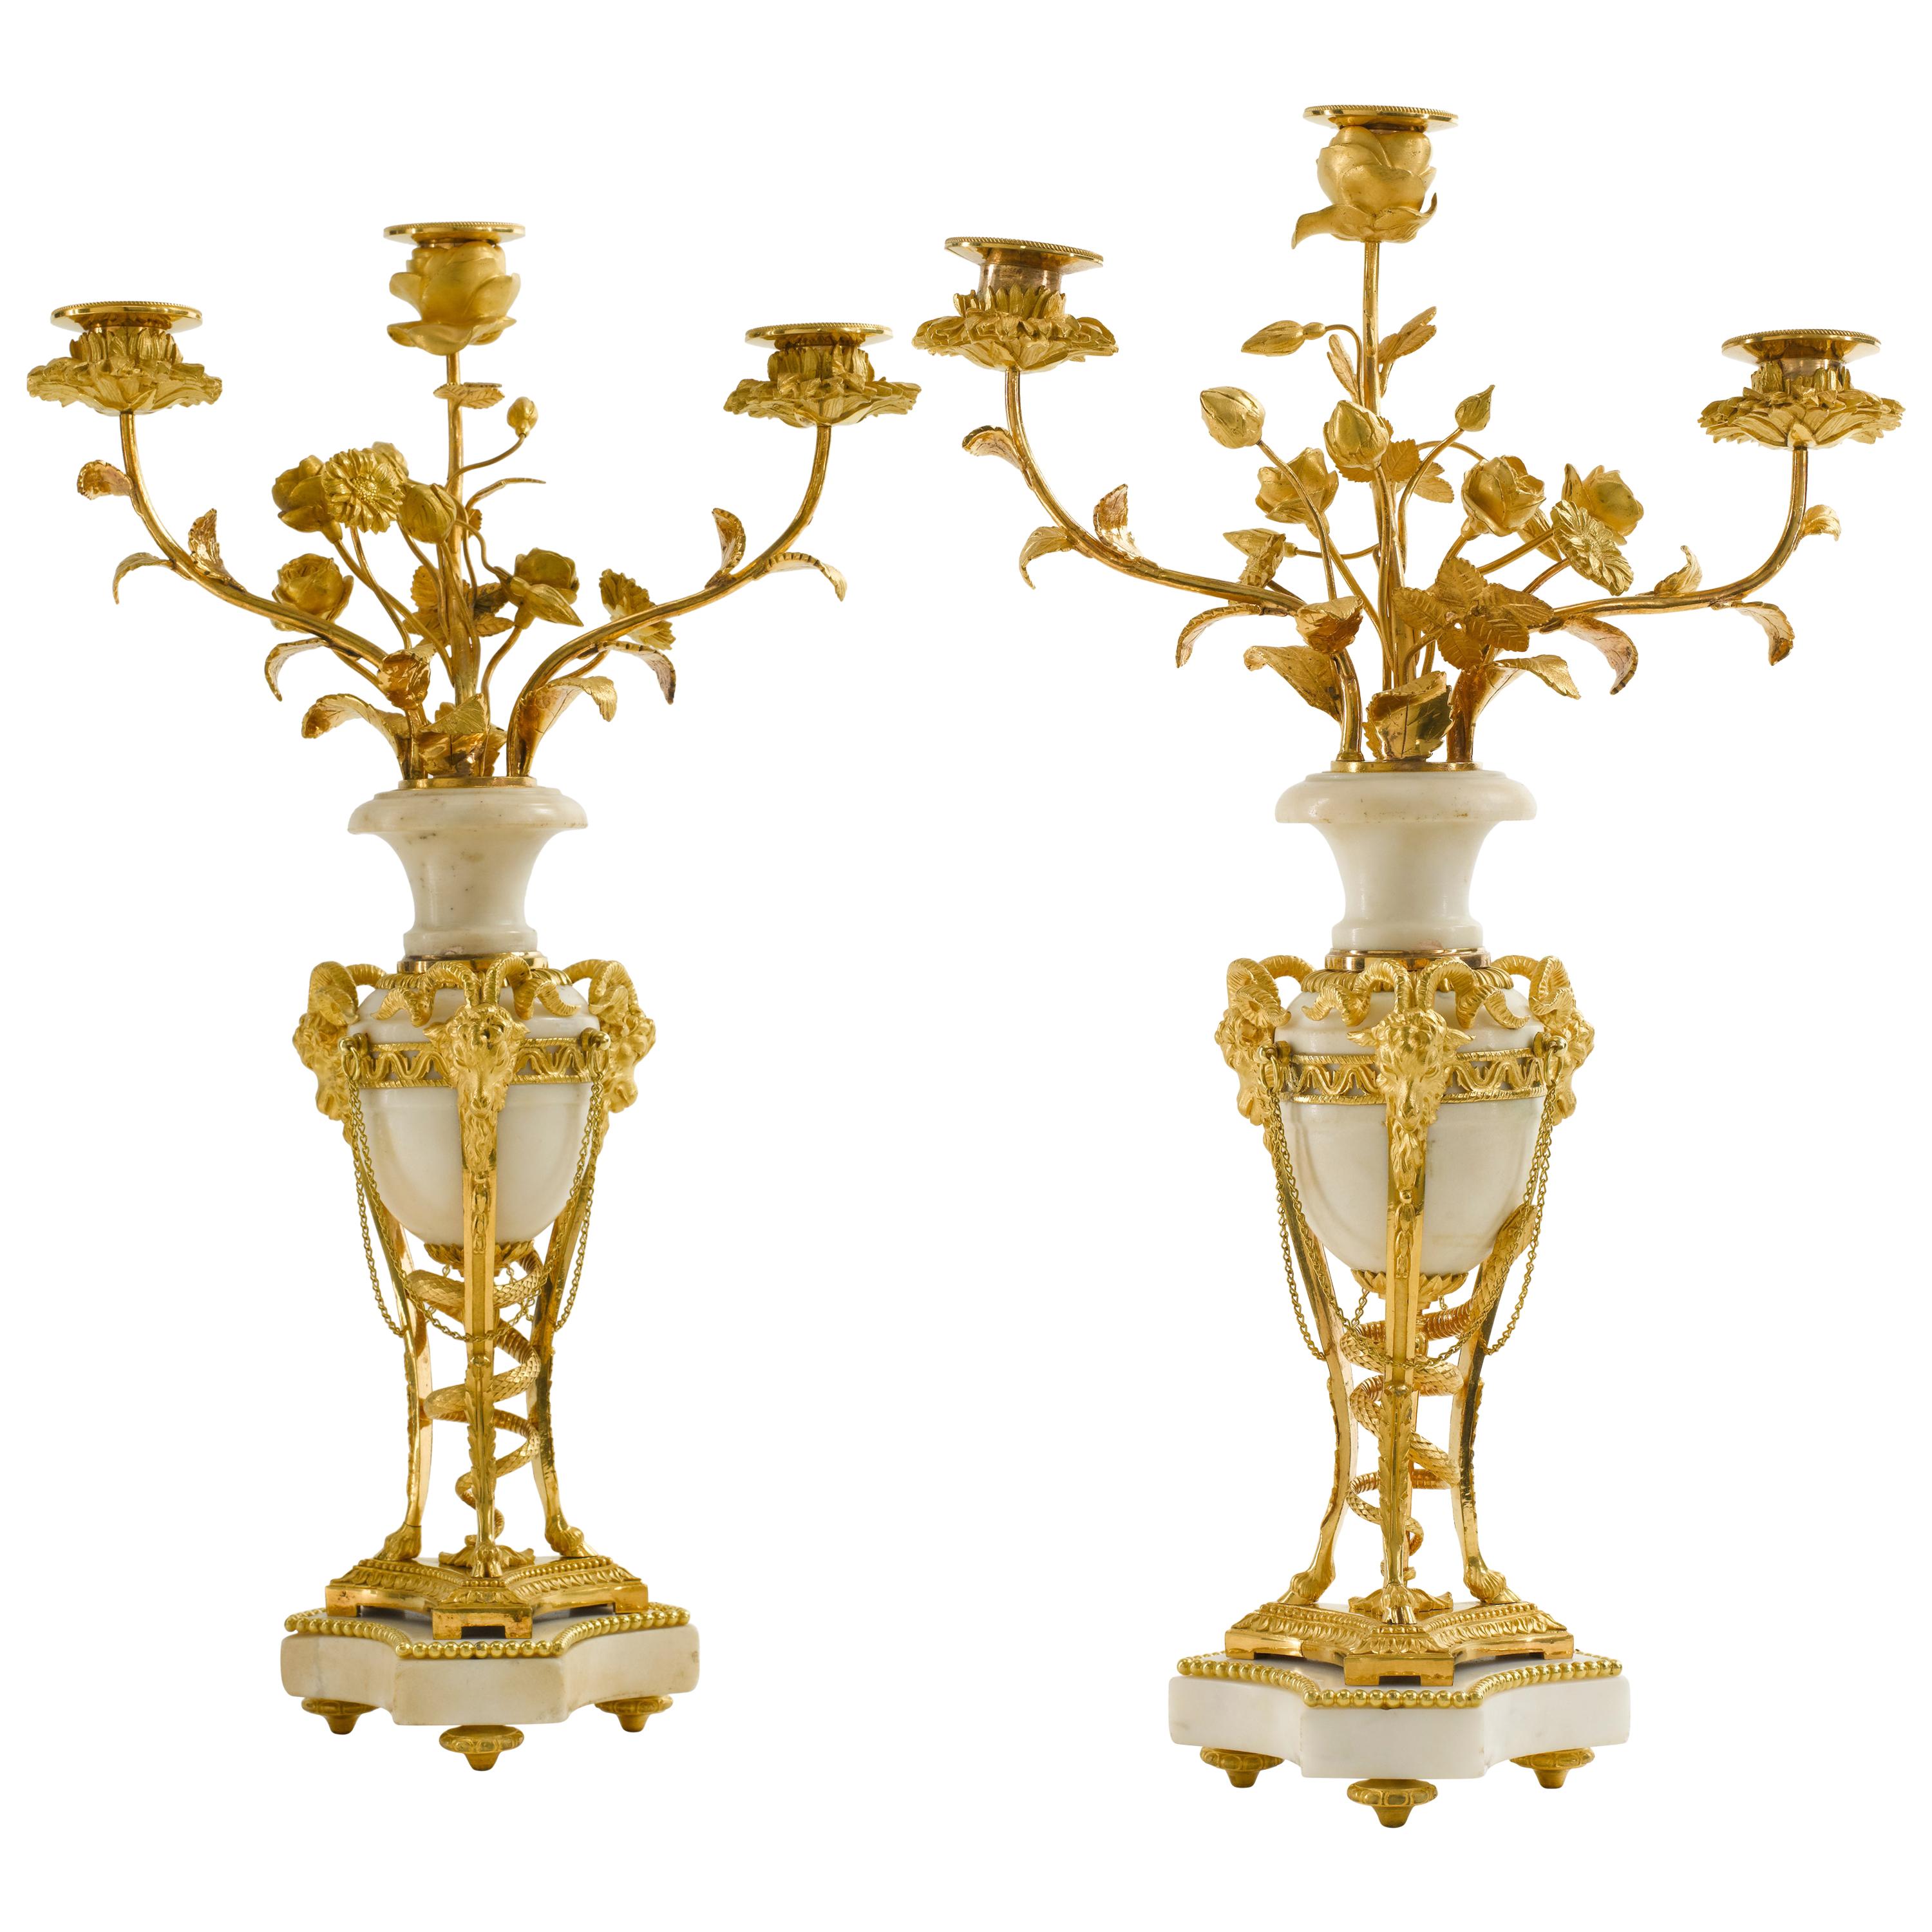 Pair of Late 18th Century Louis XVI Ormolu and White Marble Candelabra For Sale